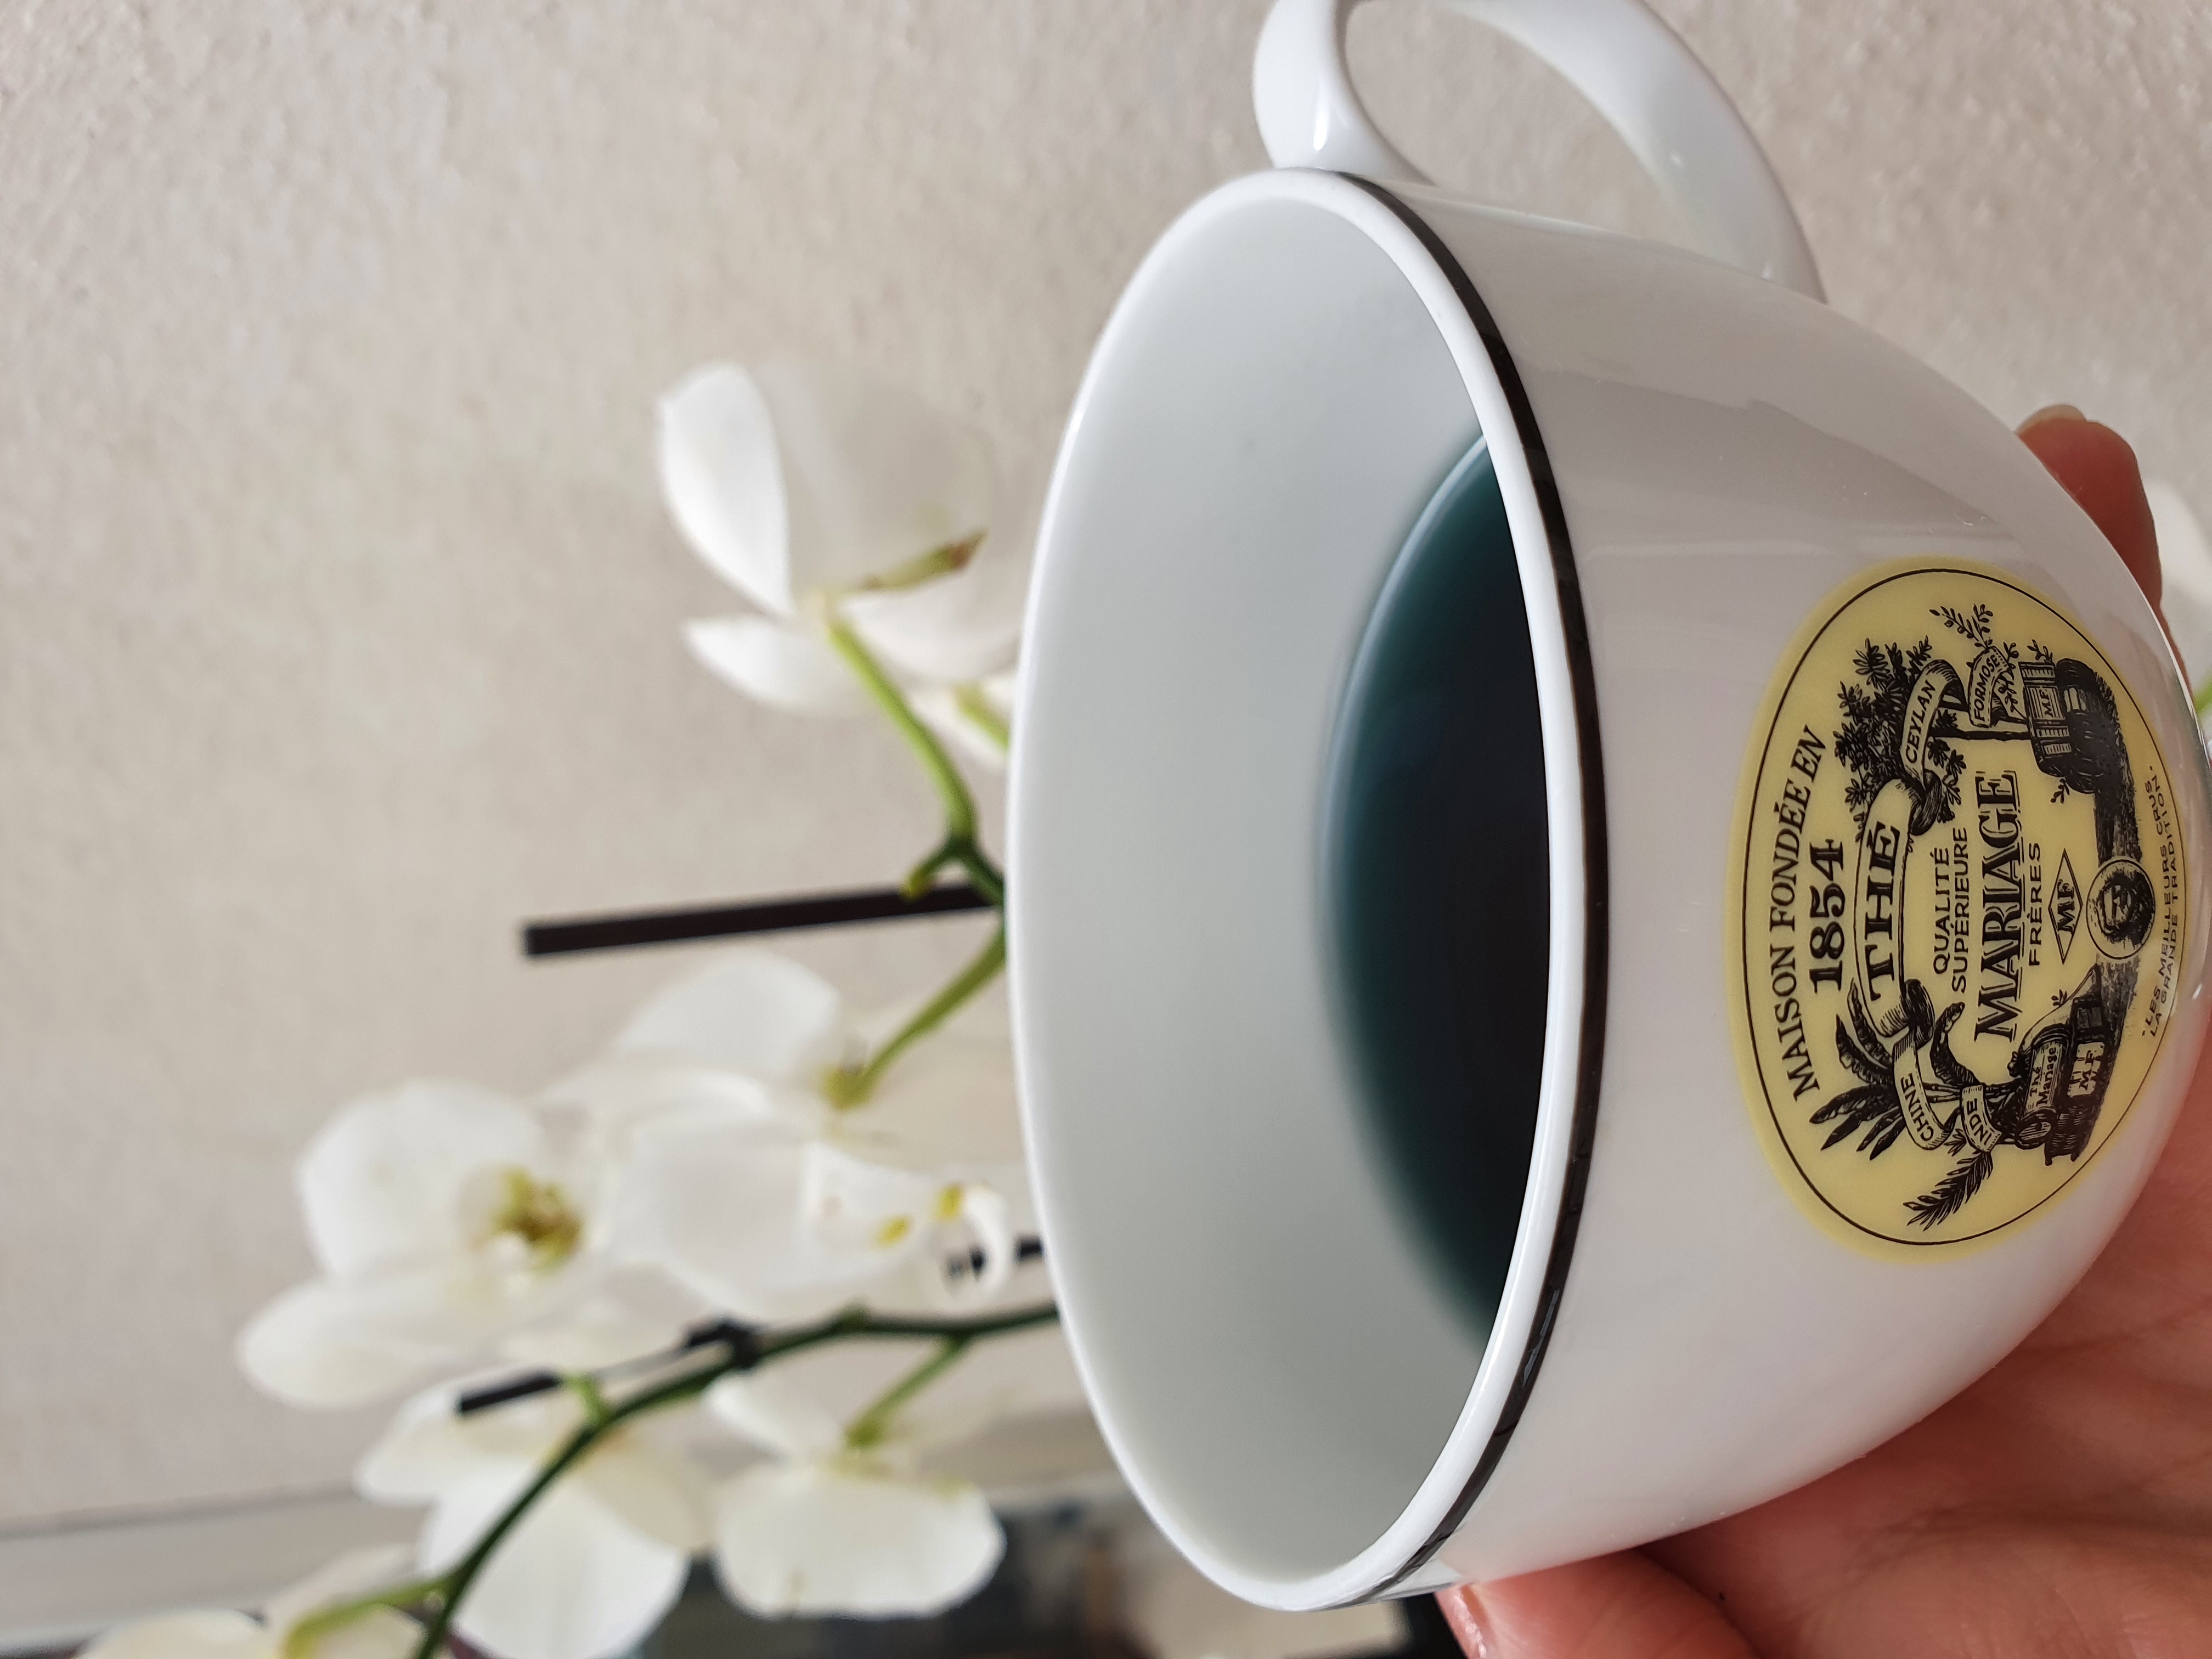 Mariage Frères - New Christmas tea - Agent luxe blog